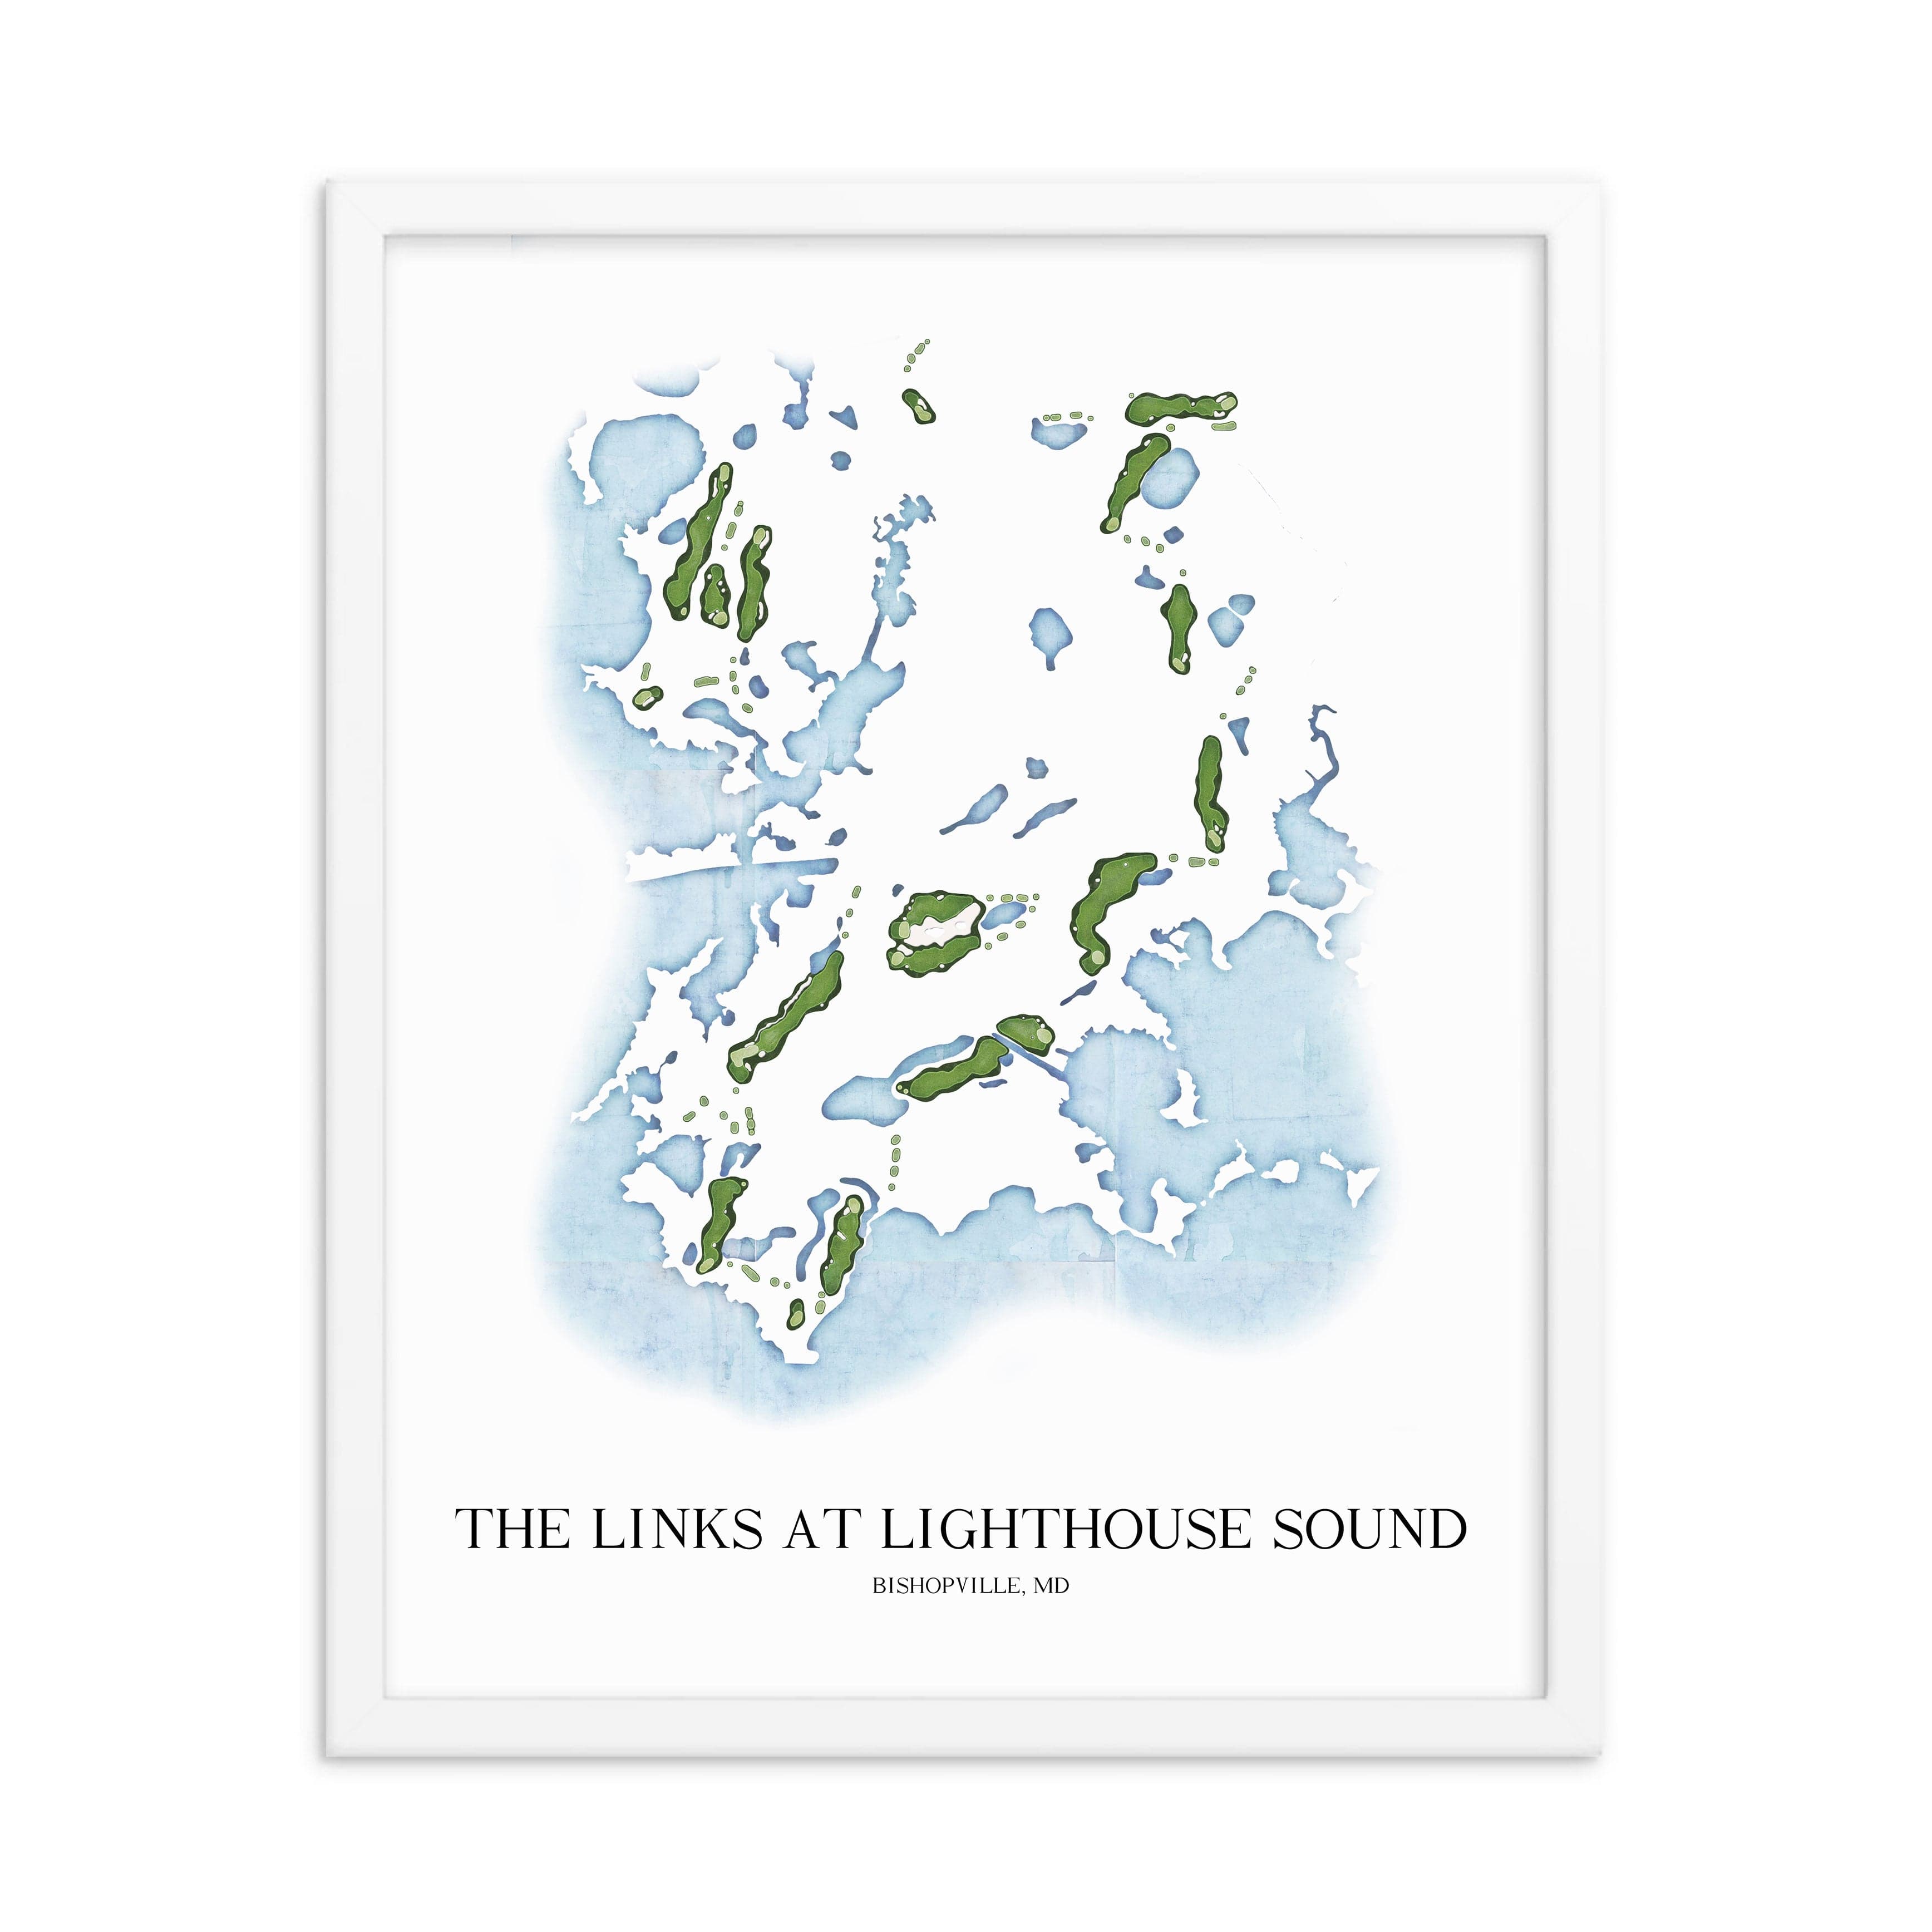 The 19th Hole Golf Shop - Golf Course Prints -  The Links at Lighthouse Sound Golf Course Map